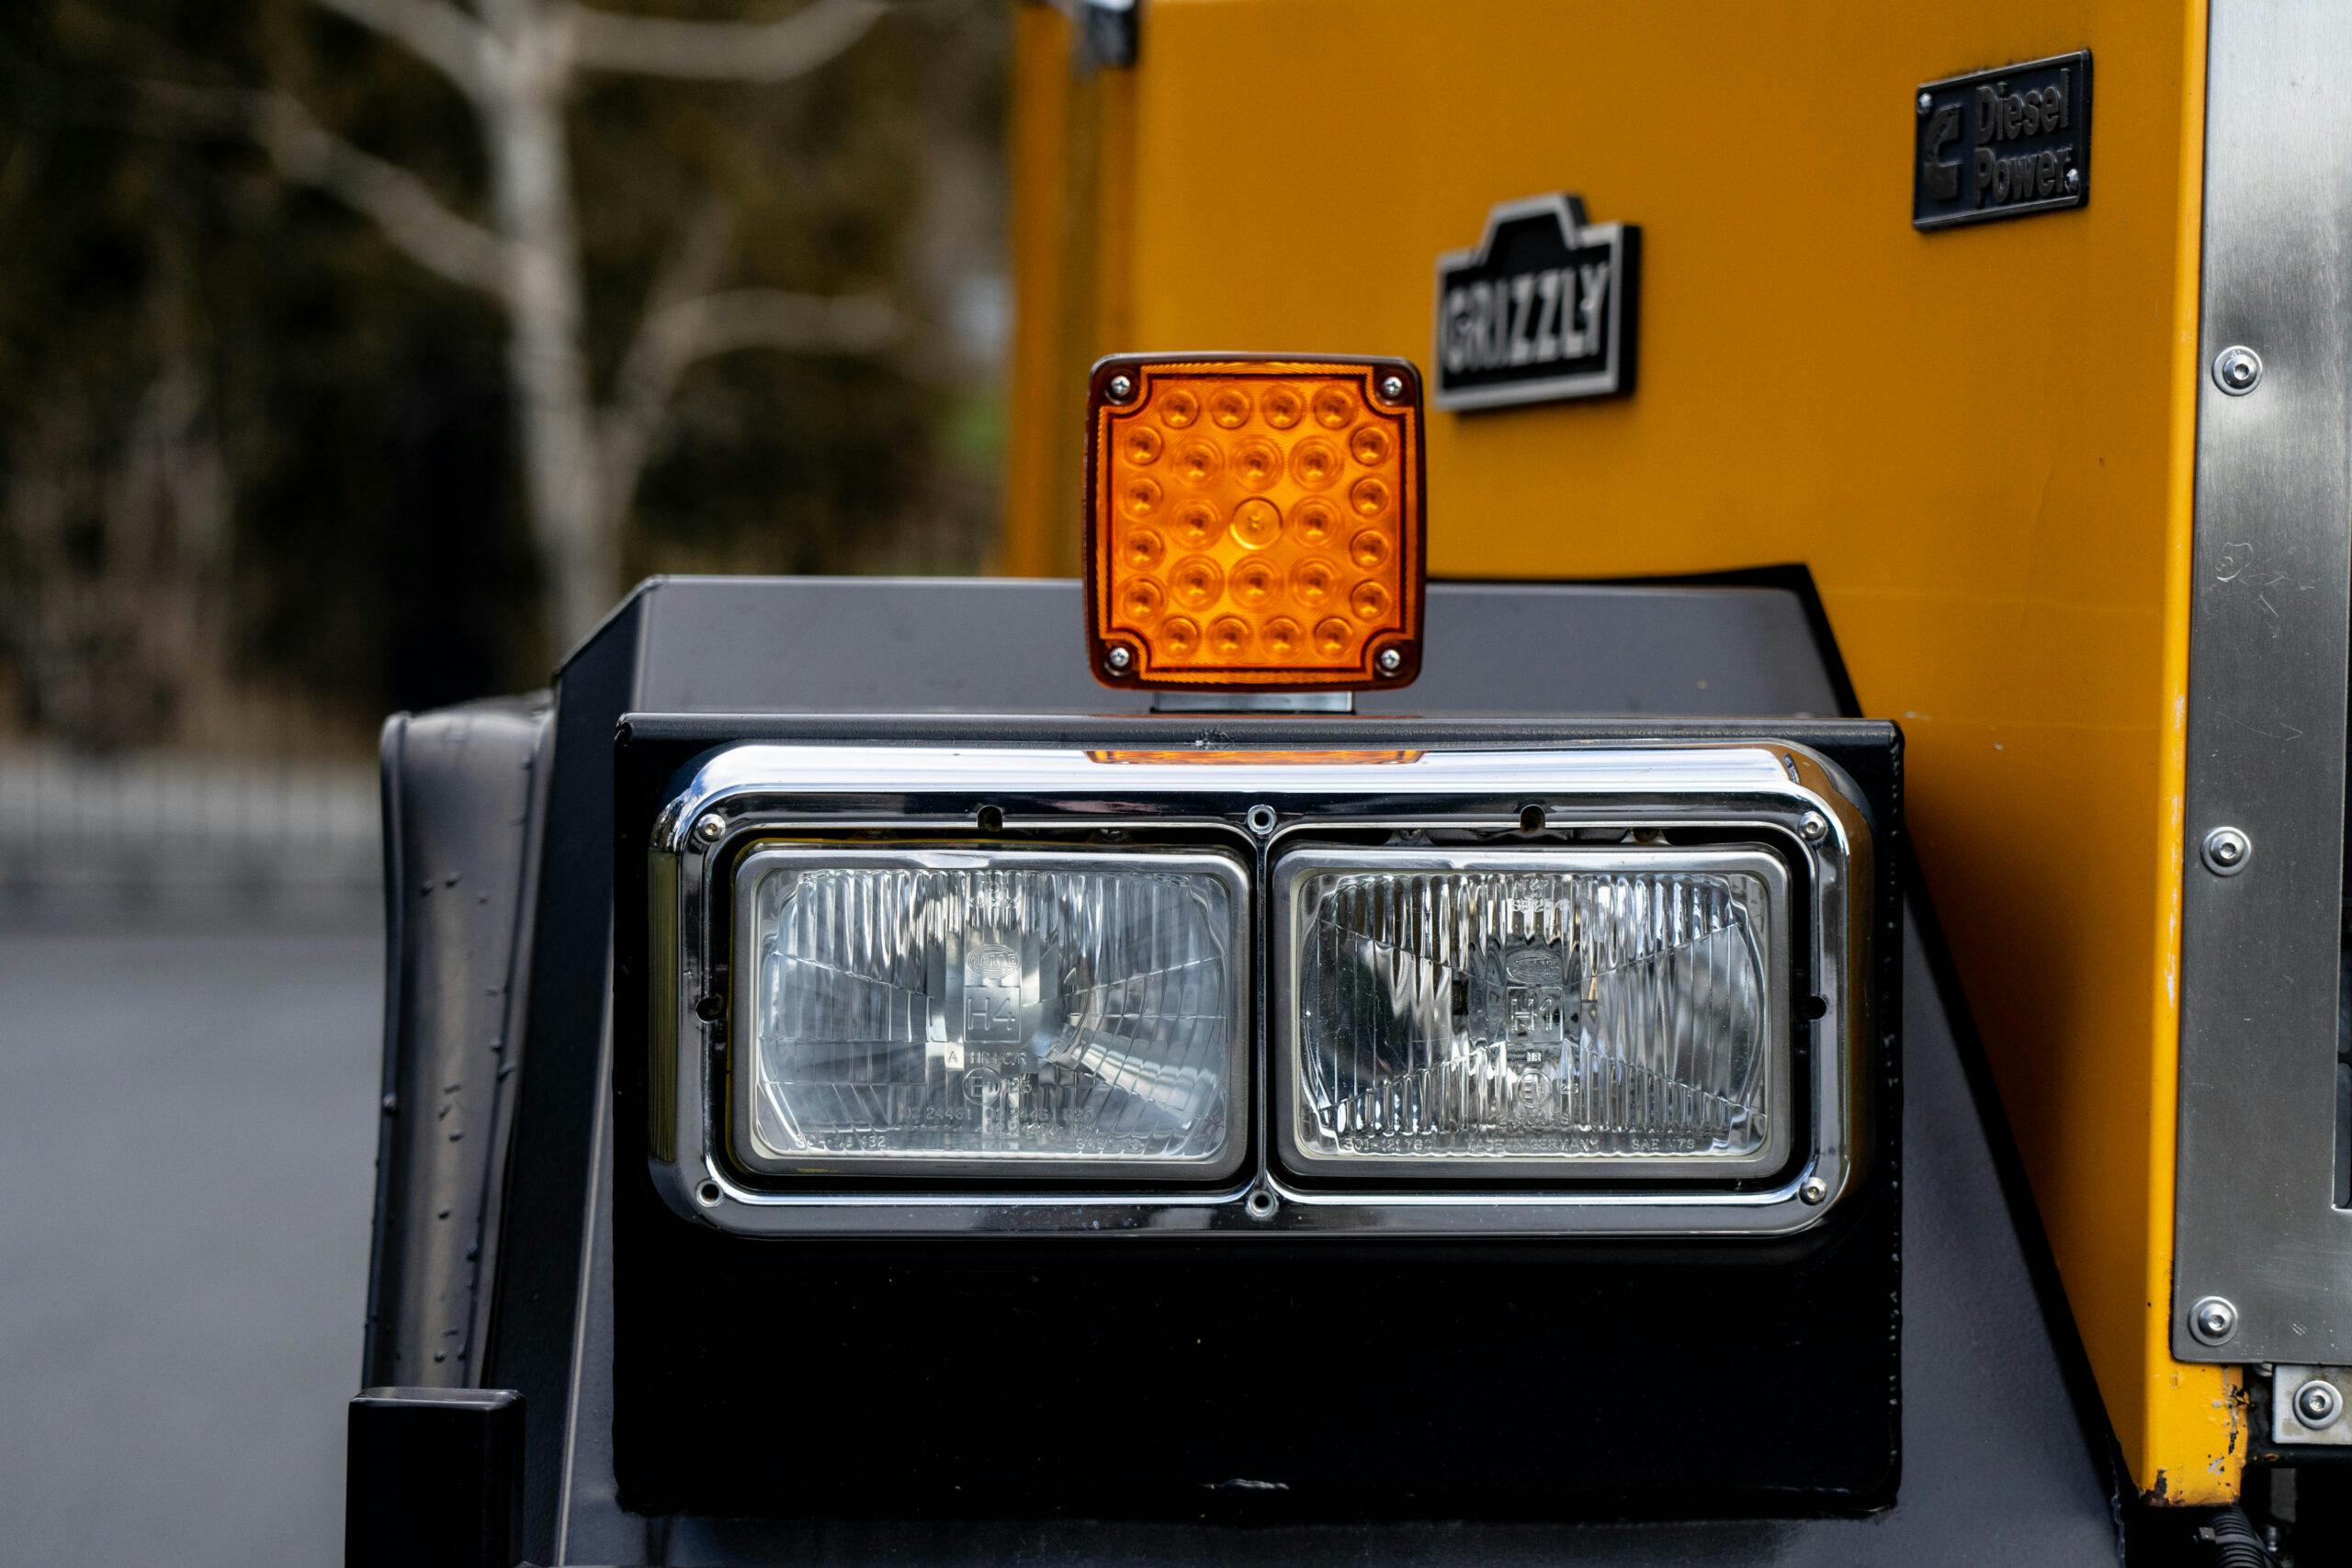 Grizzly Truck headlight